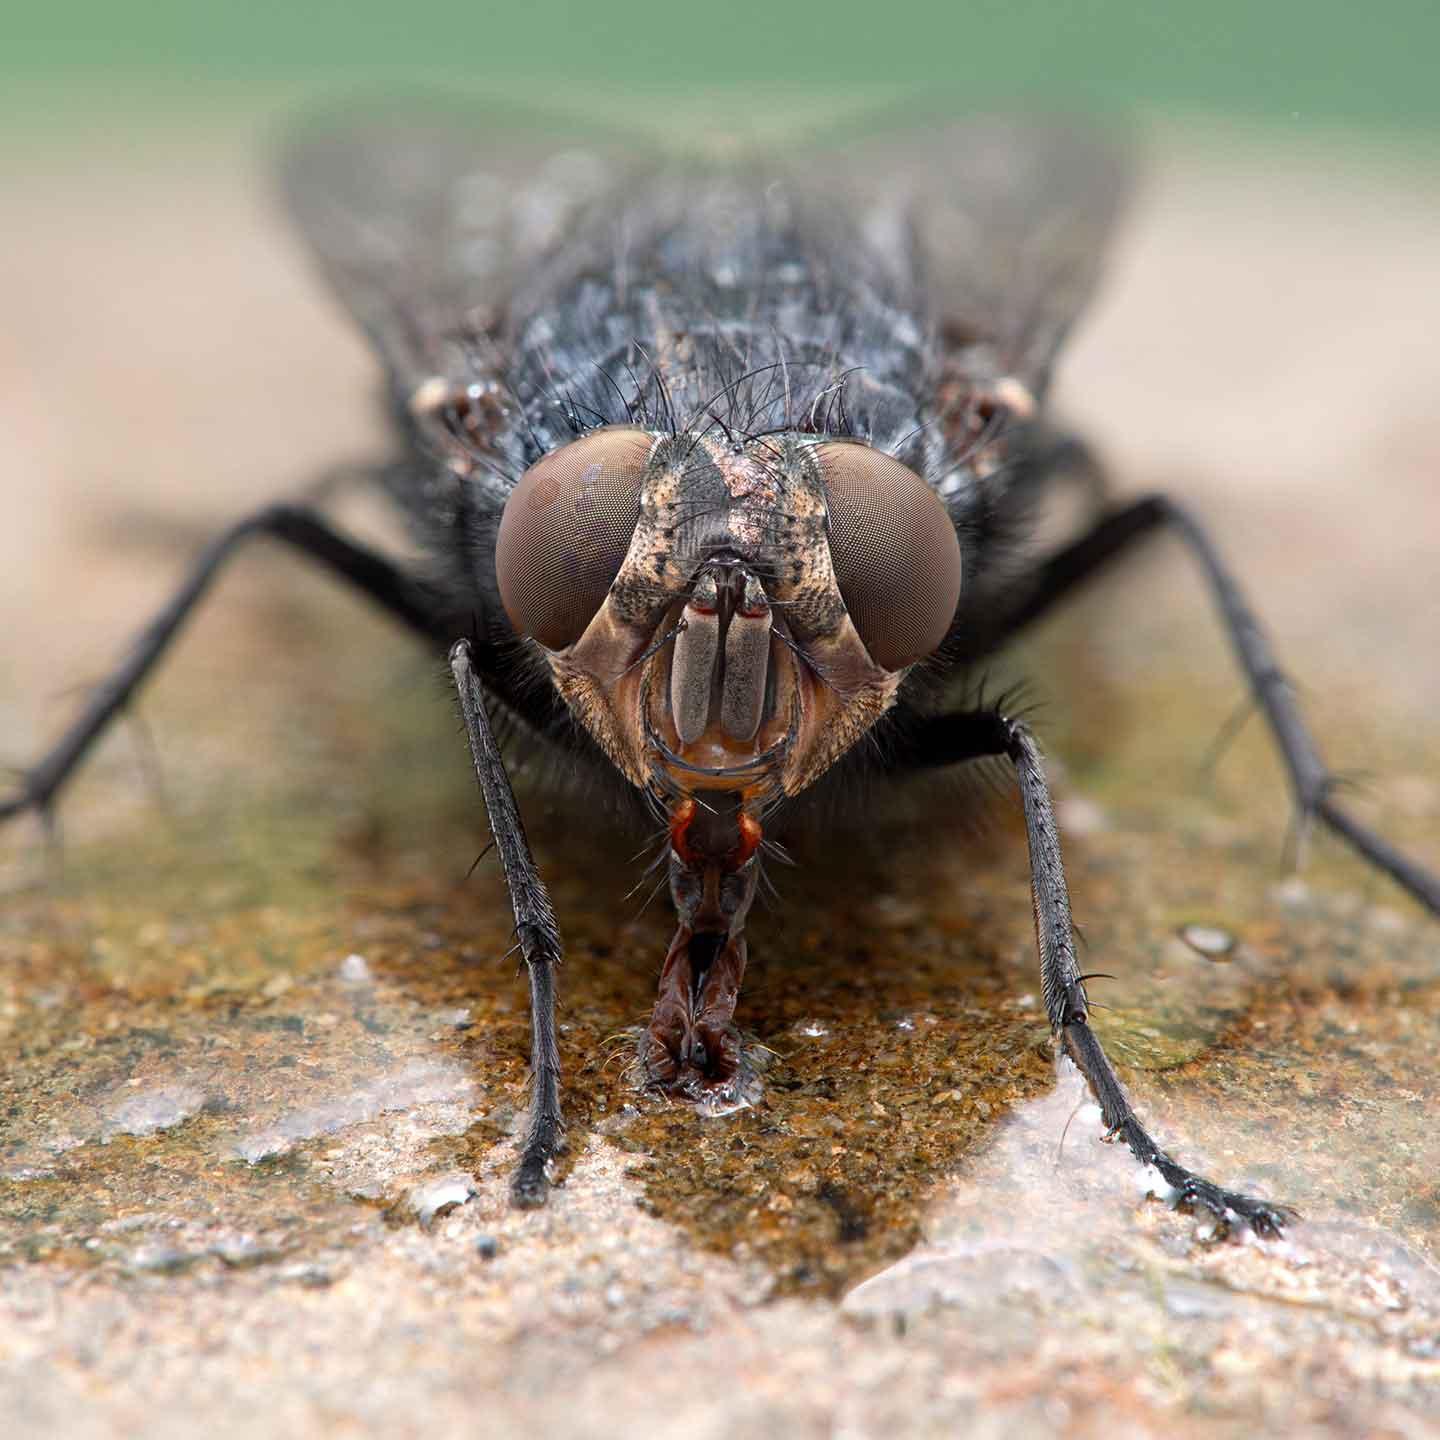 Blowfly, Calliphora vicina, drinking portrait cECP 2020, forensic entomology  ©Ernie Cooper, Adobe Stock Extended License